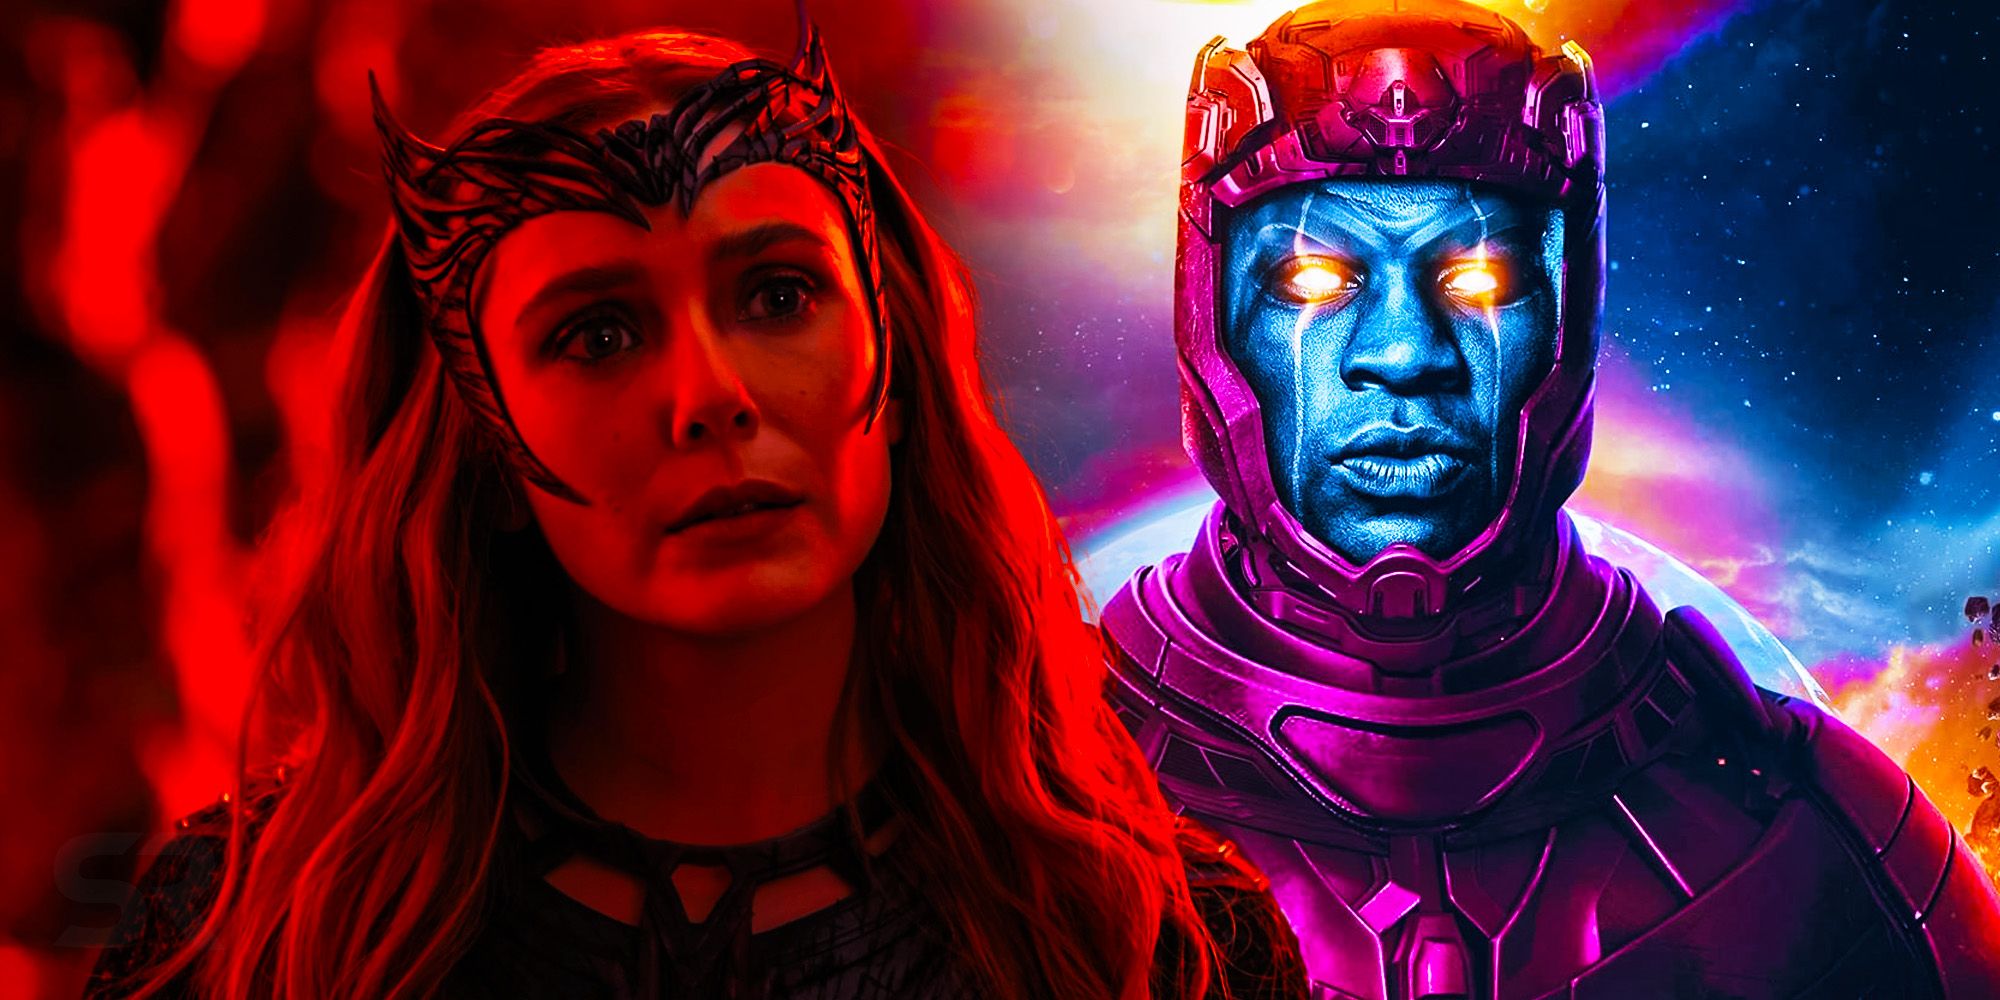 Scarlet witch is the best threat against kang